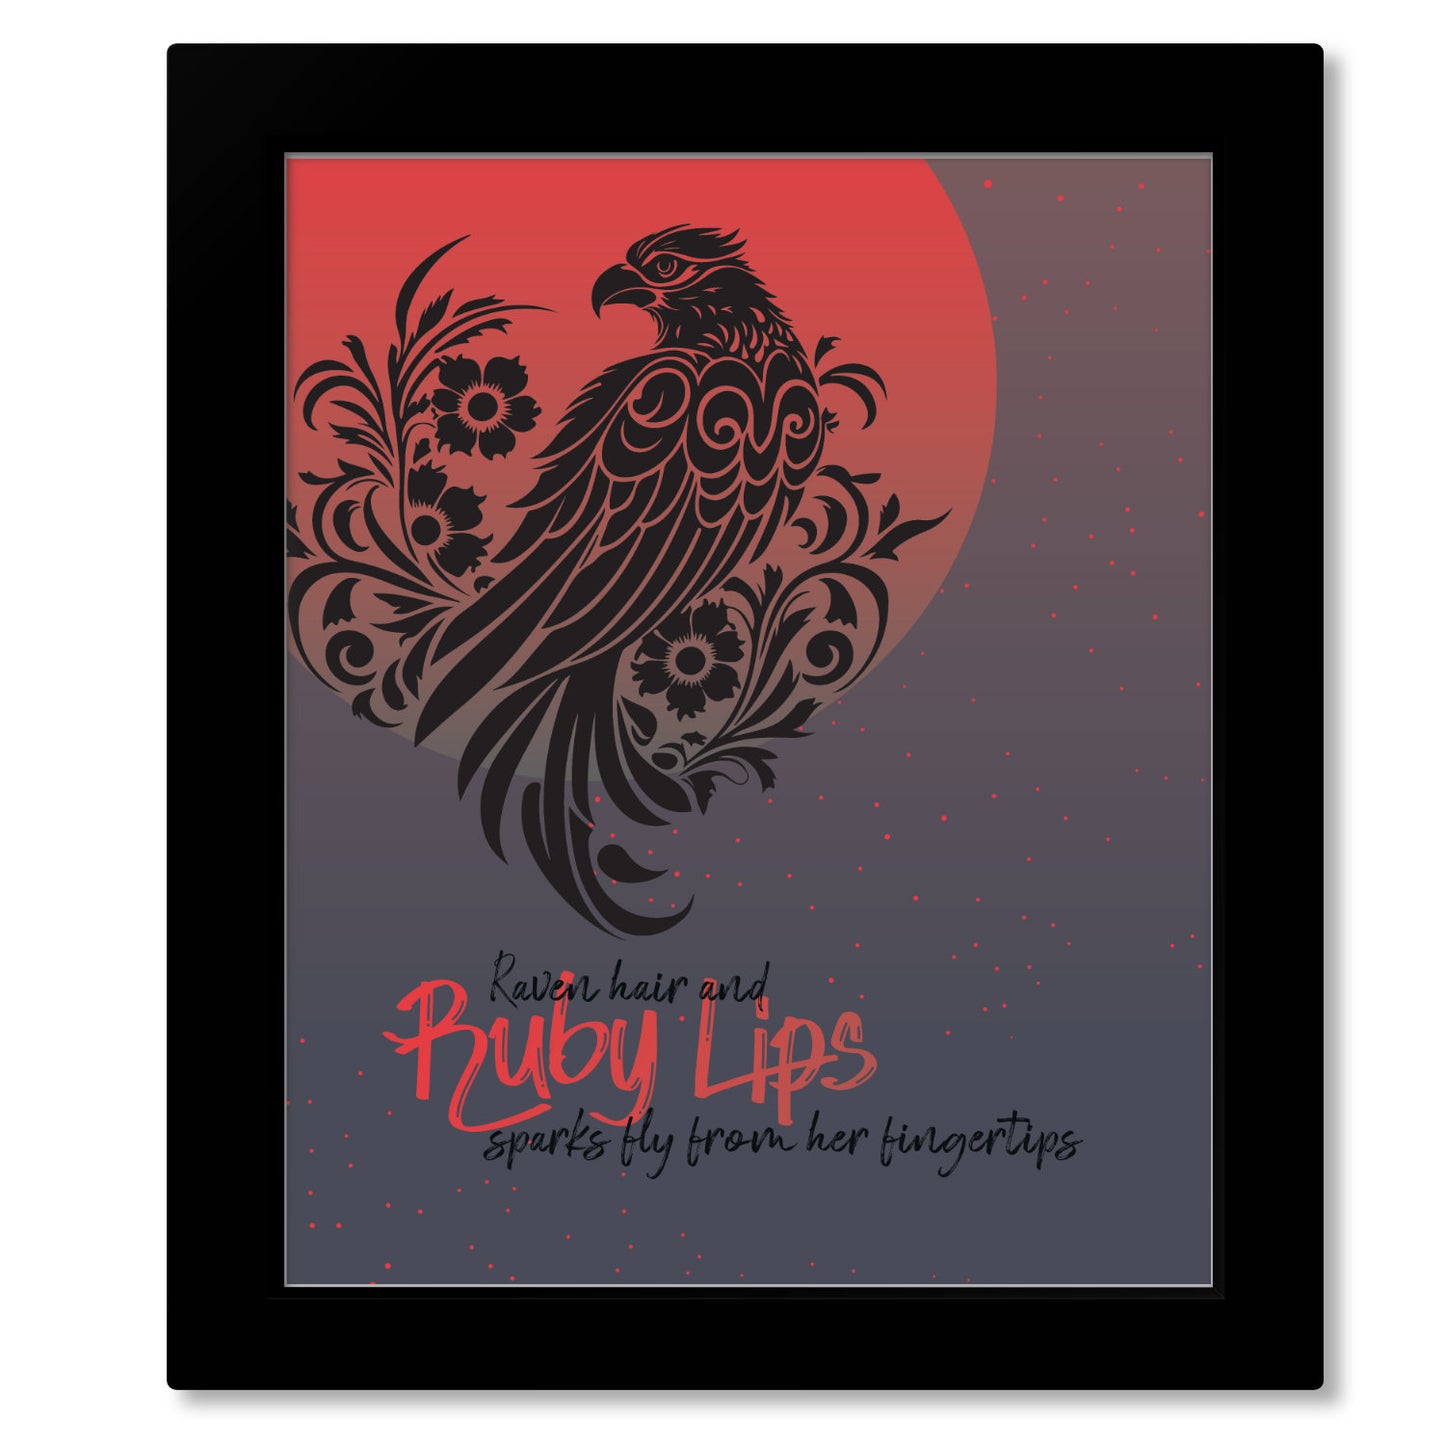 Witchy Woman by the Eagles - Rock Music Song Lyric Art Print